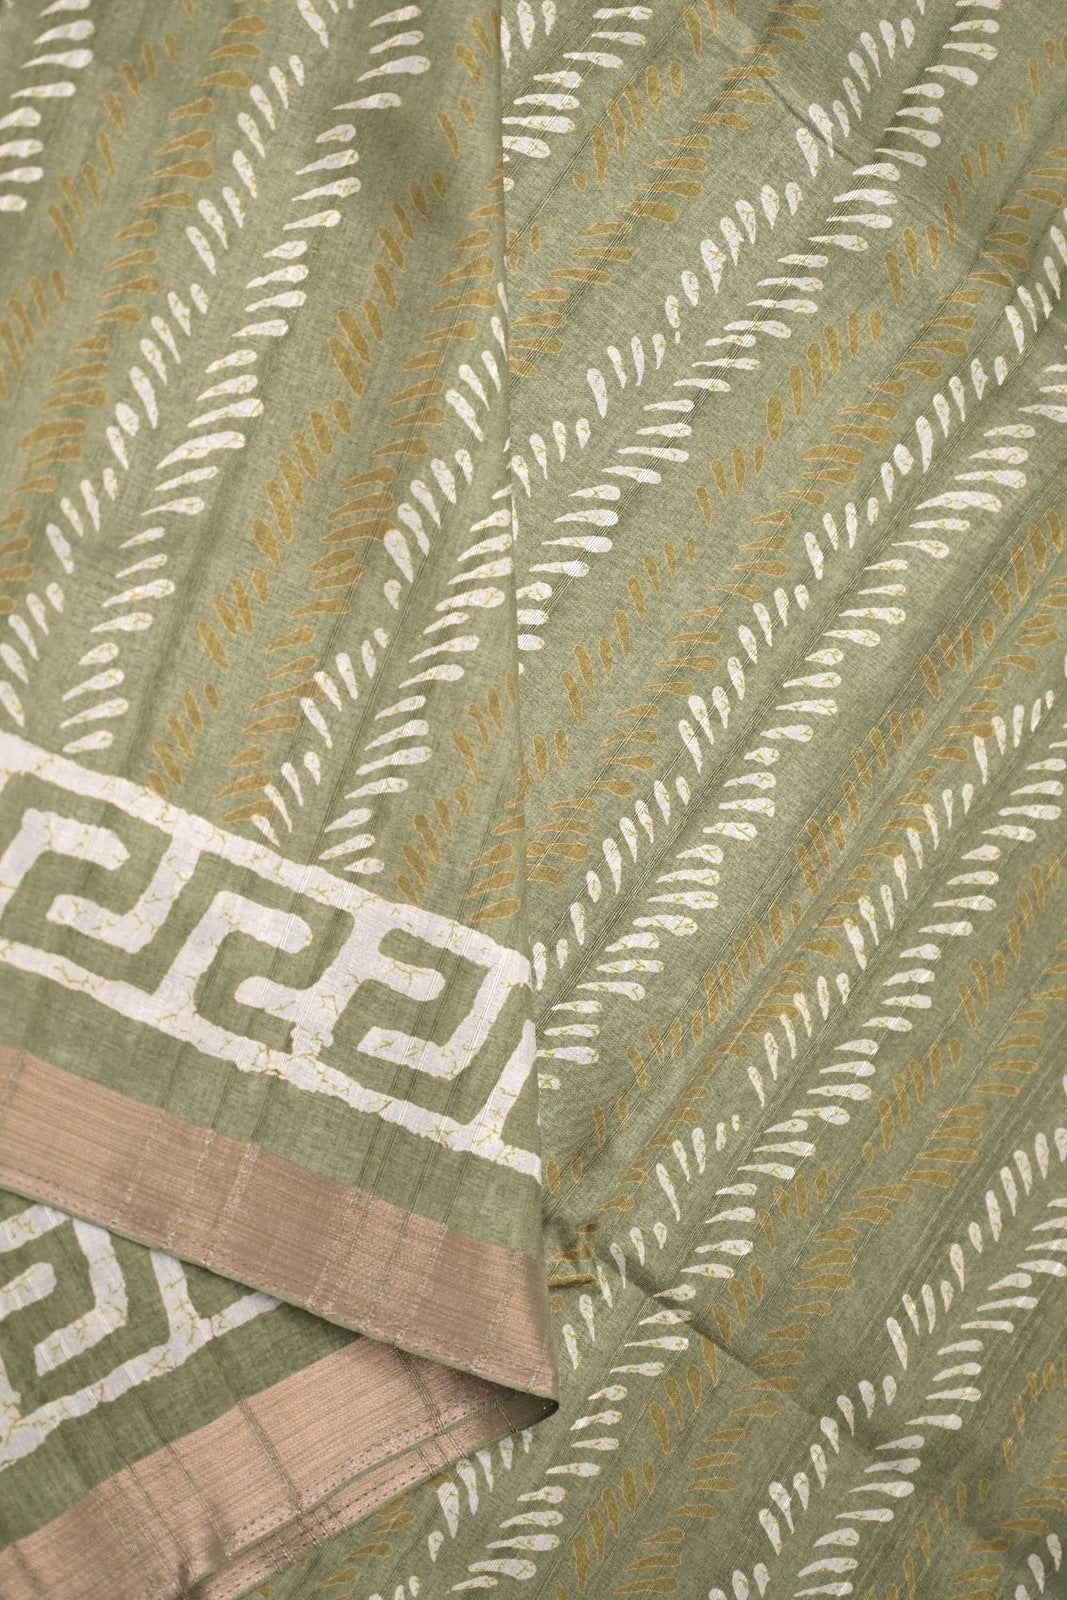 Jute tussar fancy sea green color allover prints & small printed kaddi border with attached printed blouse